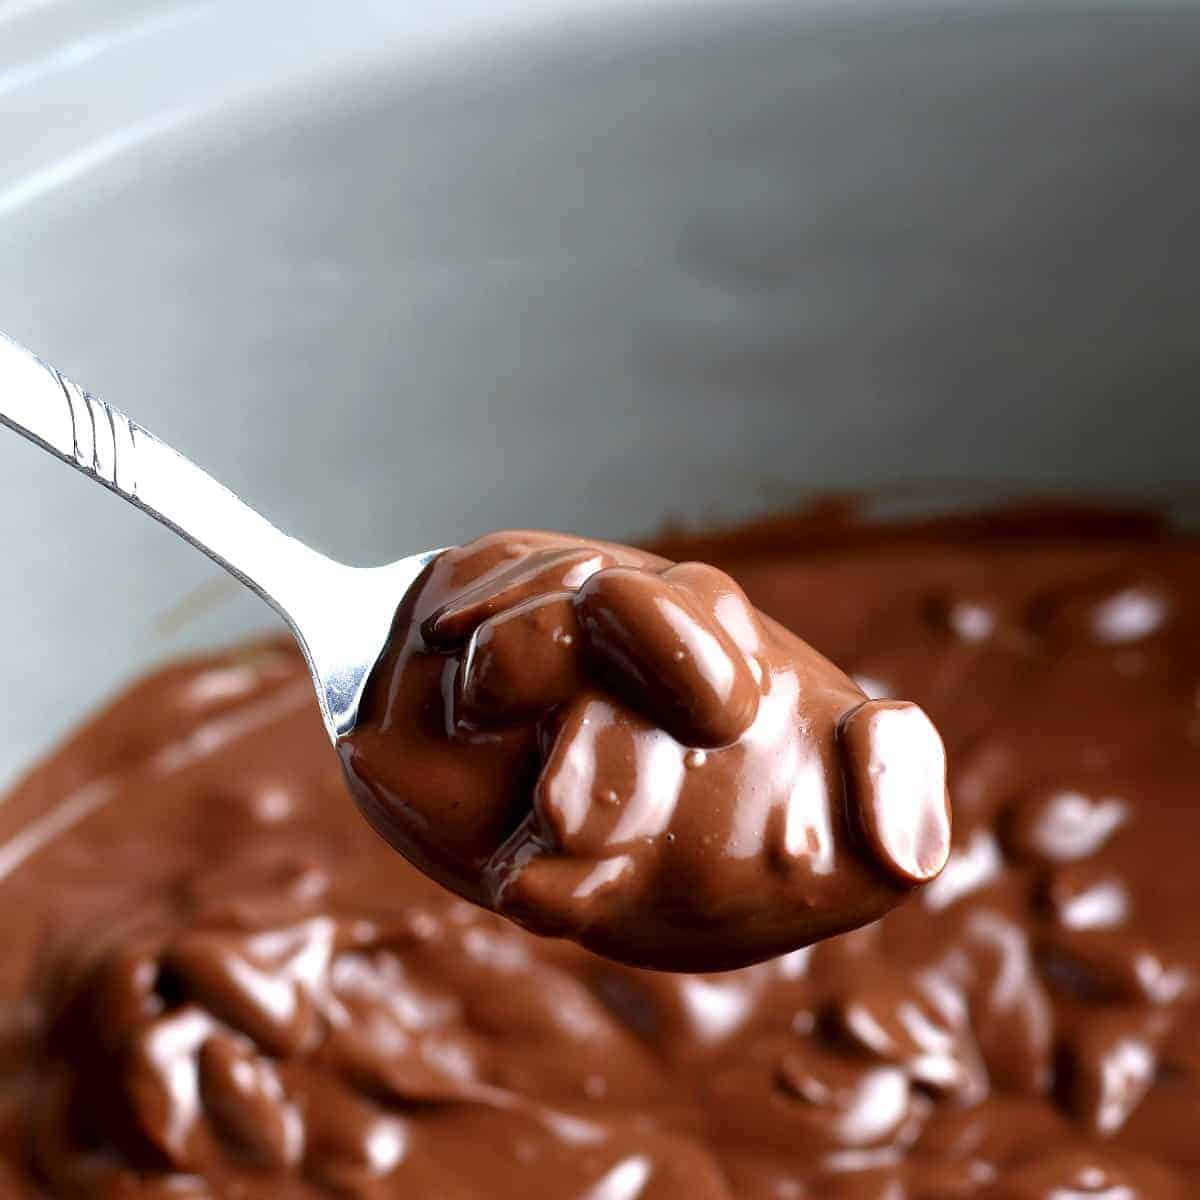 Christmas chocolate is melted with peanuts and scooped up with a tablespoon.